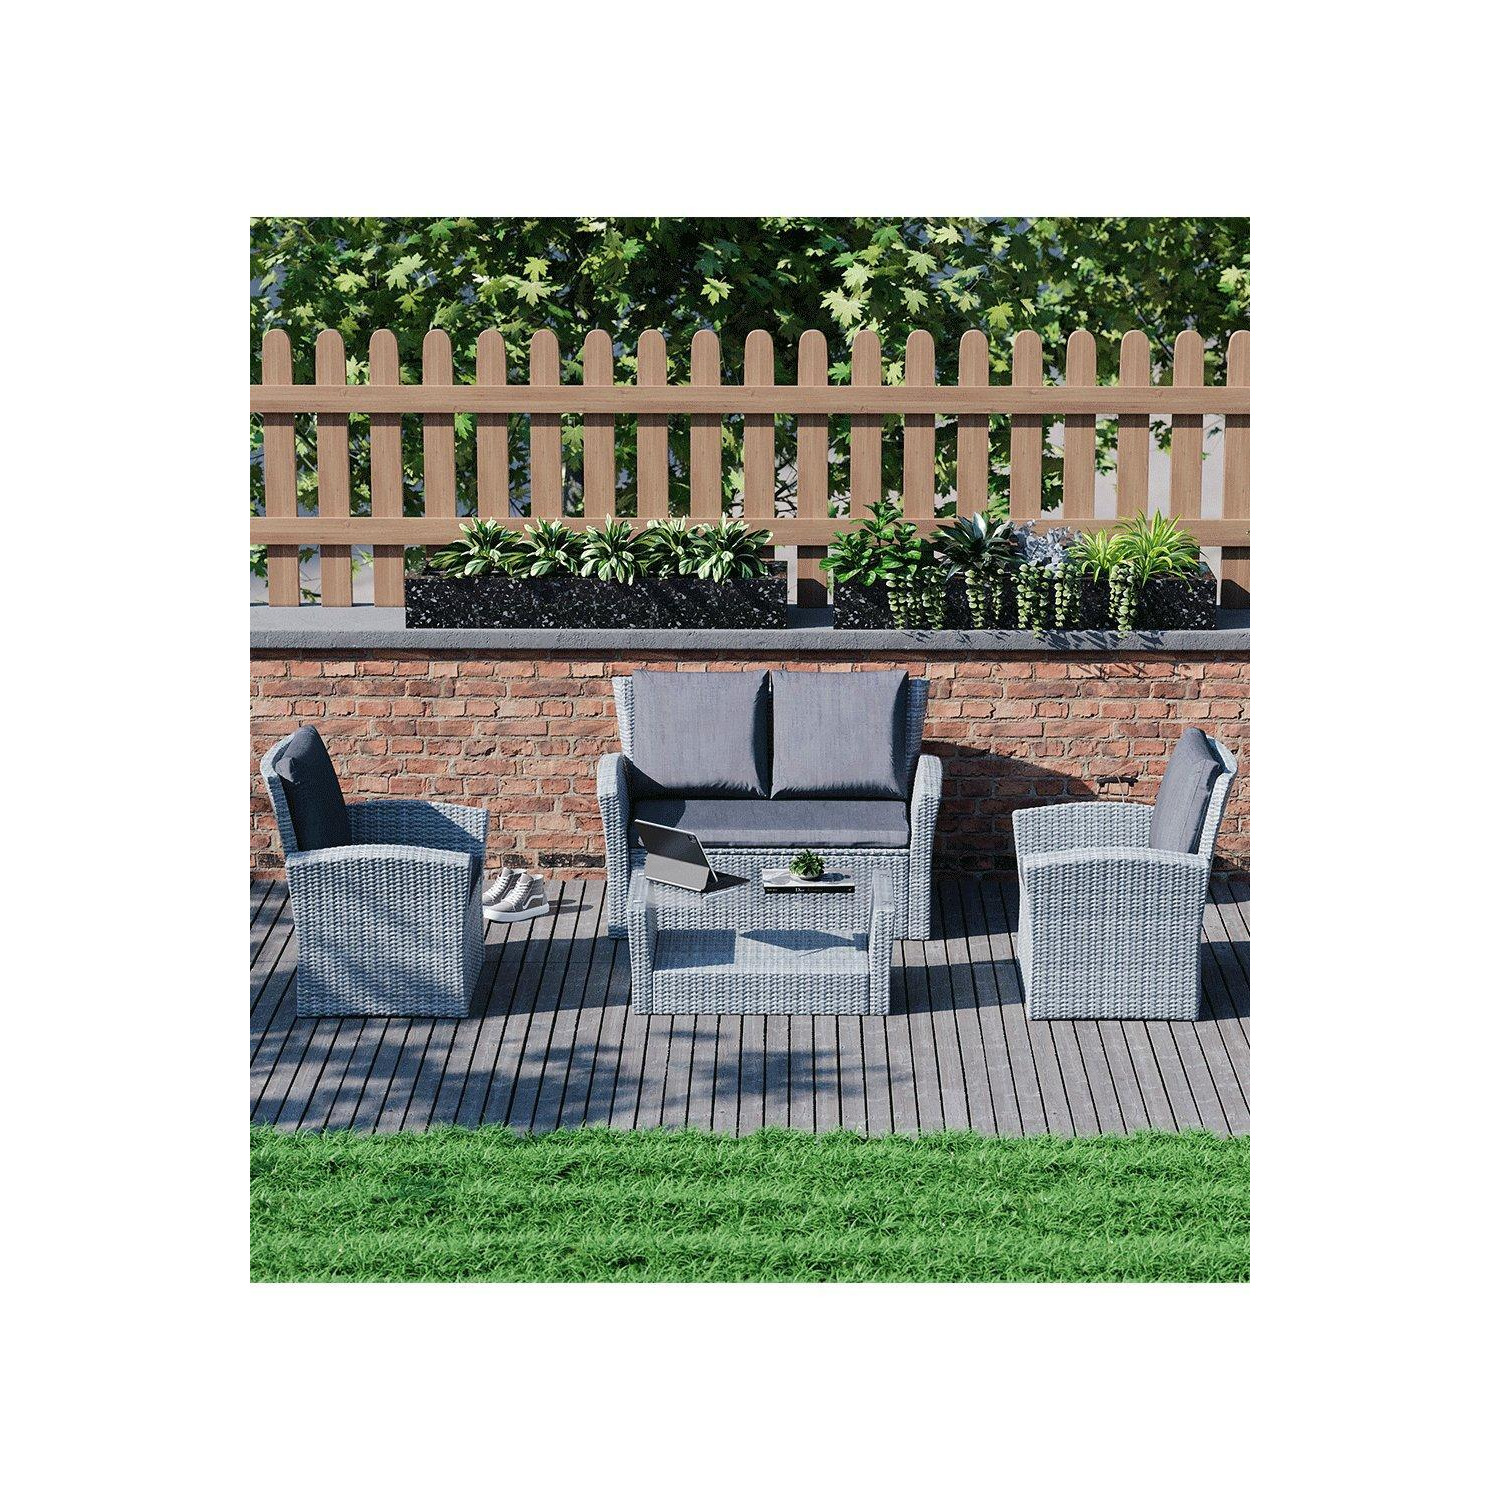 5 Pc and Cover - Garden Vida Mylor 4 Seater Rattan Set & Outdoor Patio Furniture Cover - image 1